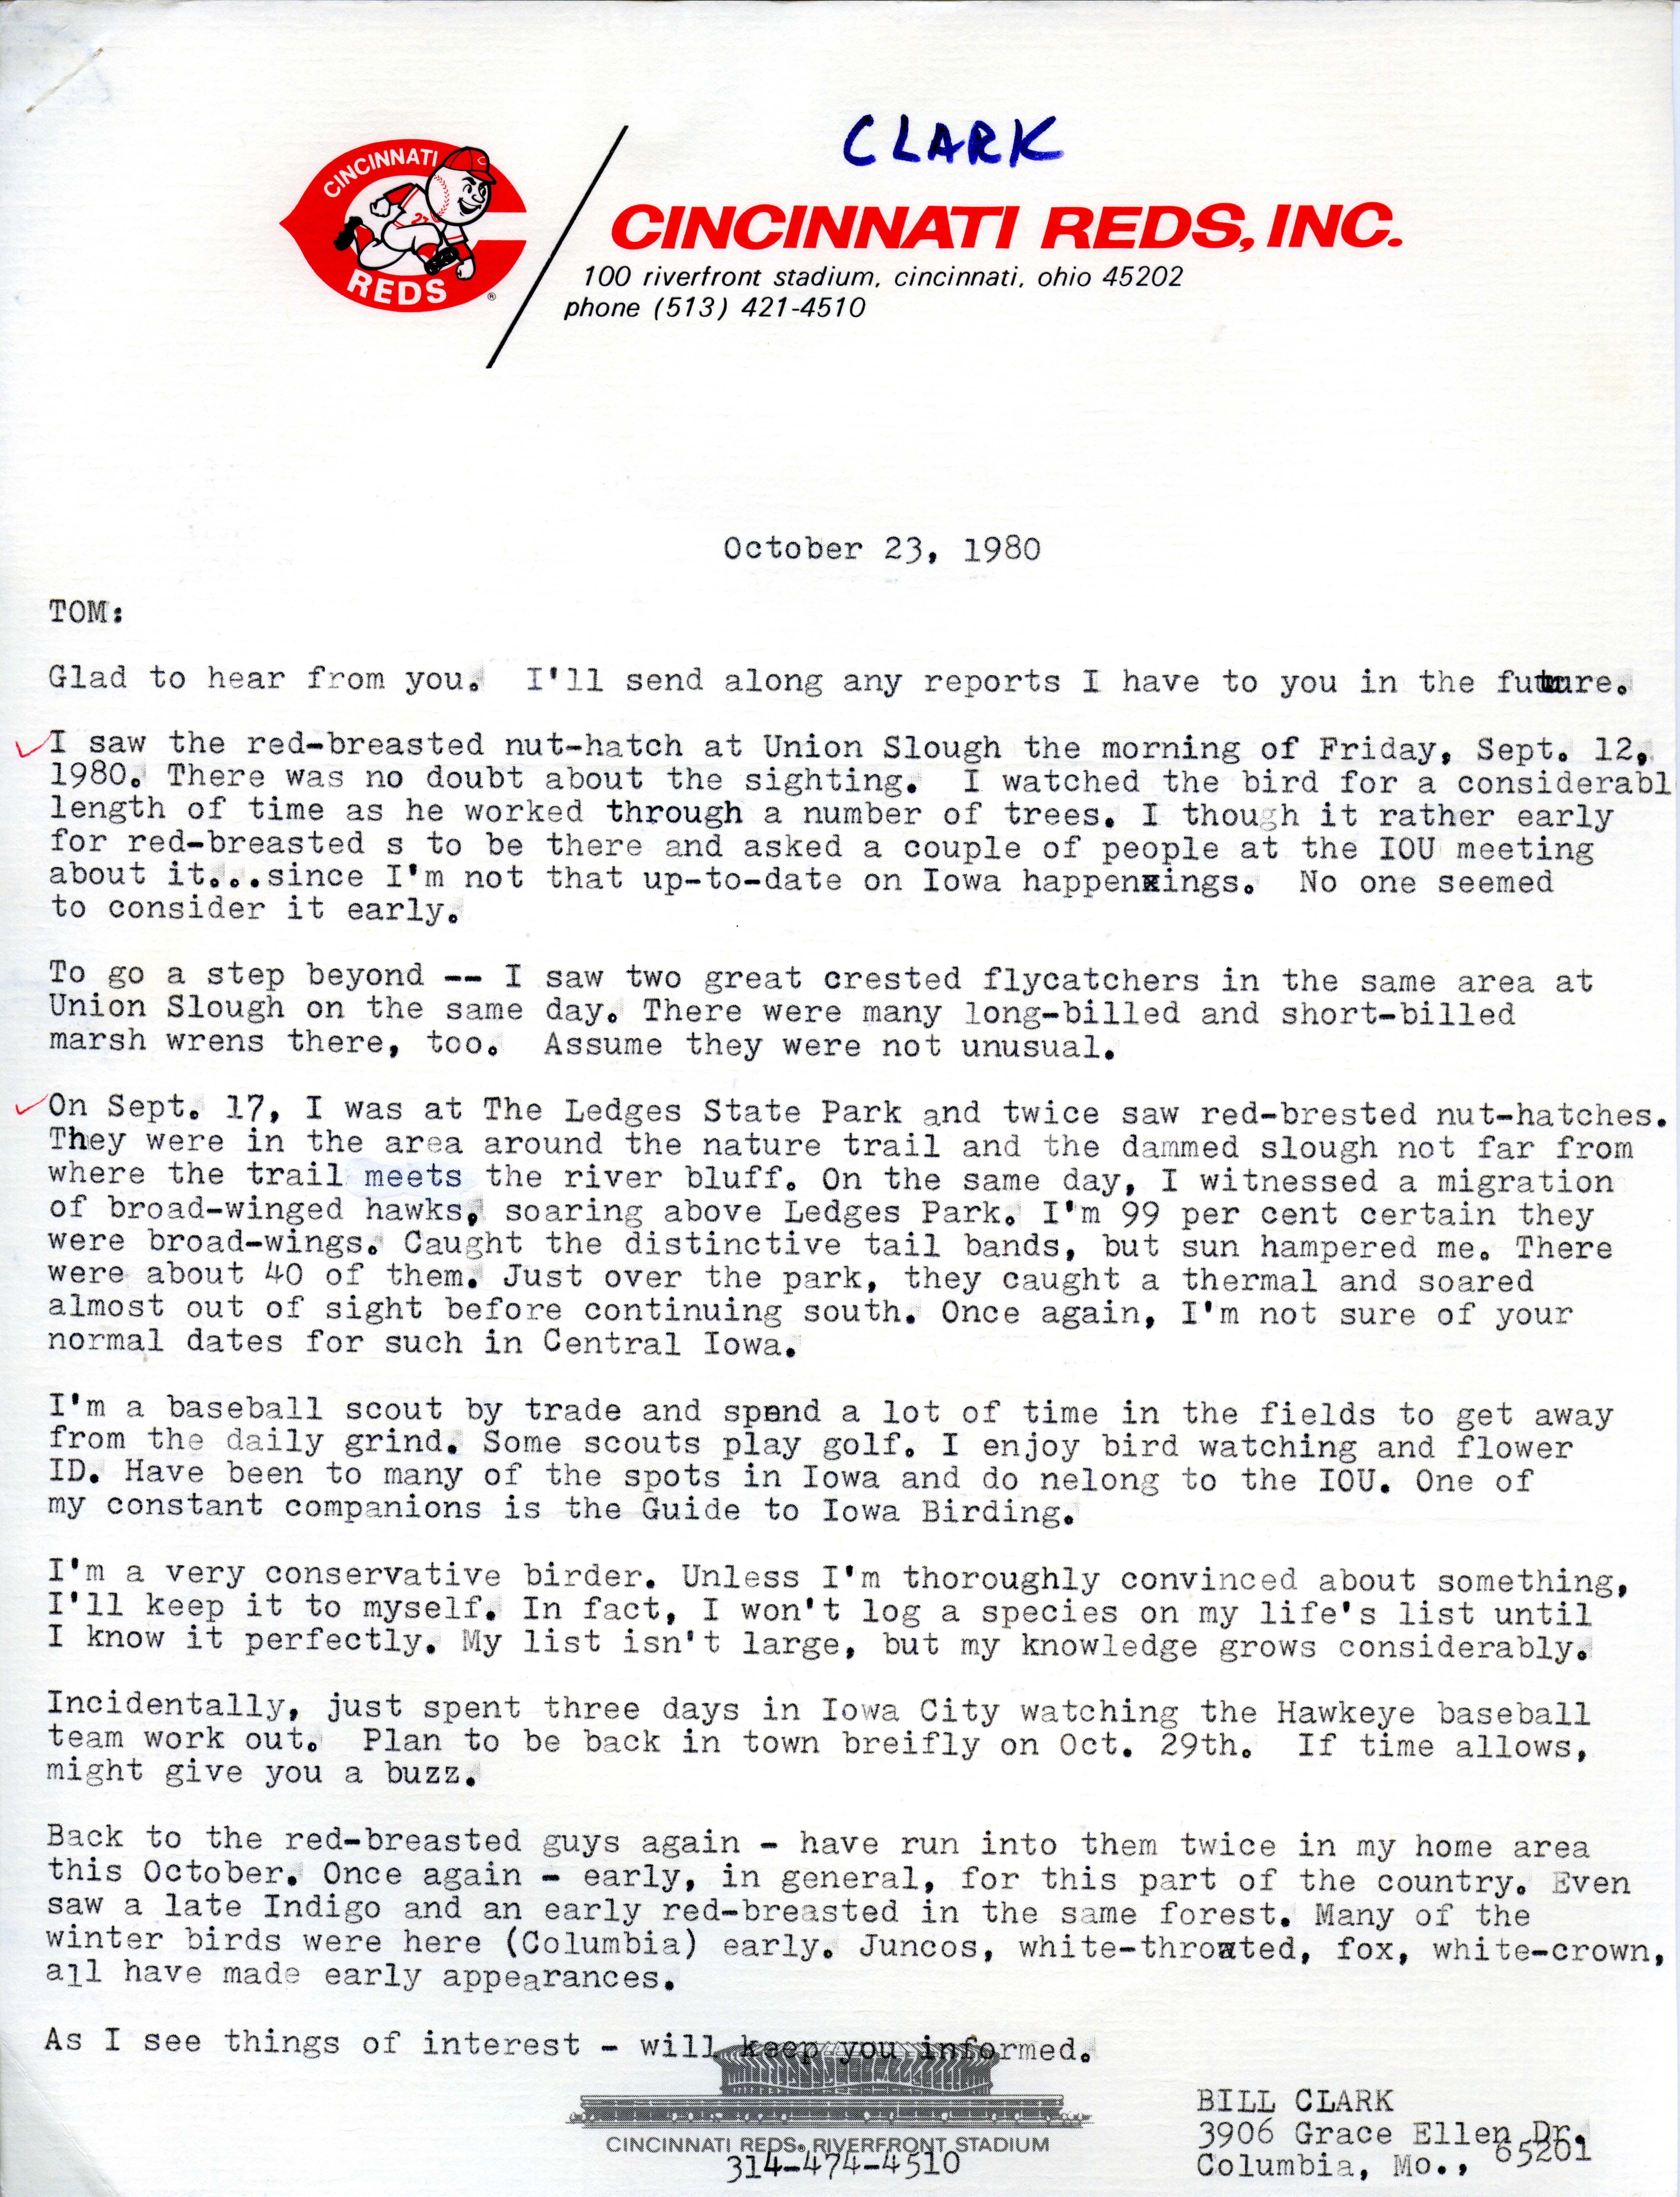 Bill Clark letter to Thomas Kent regarding additional details about his bird sightings in Iowa, October 23, 1980